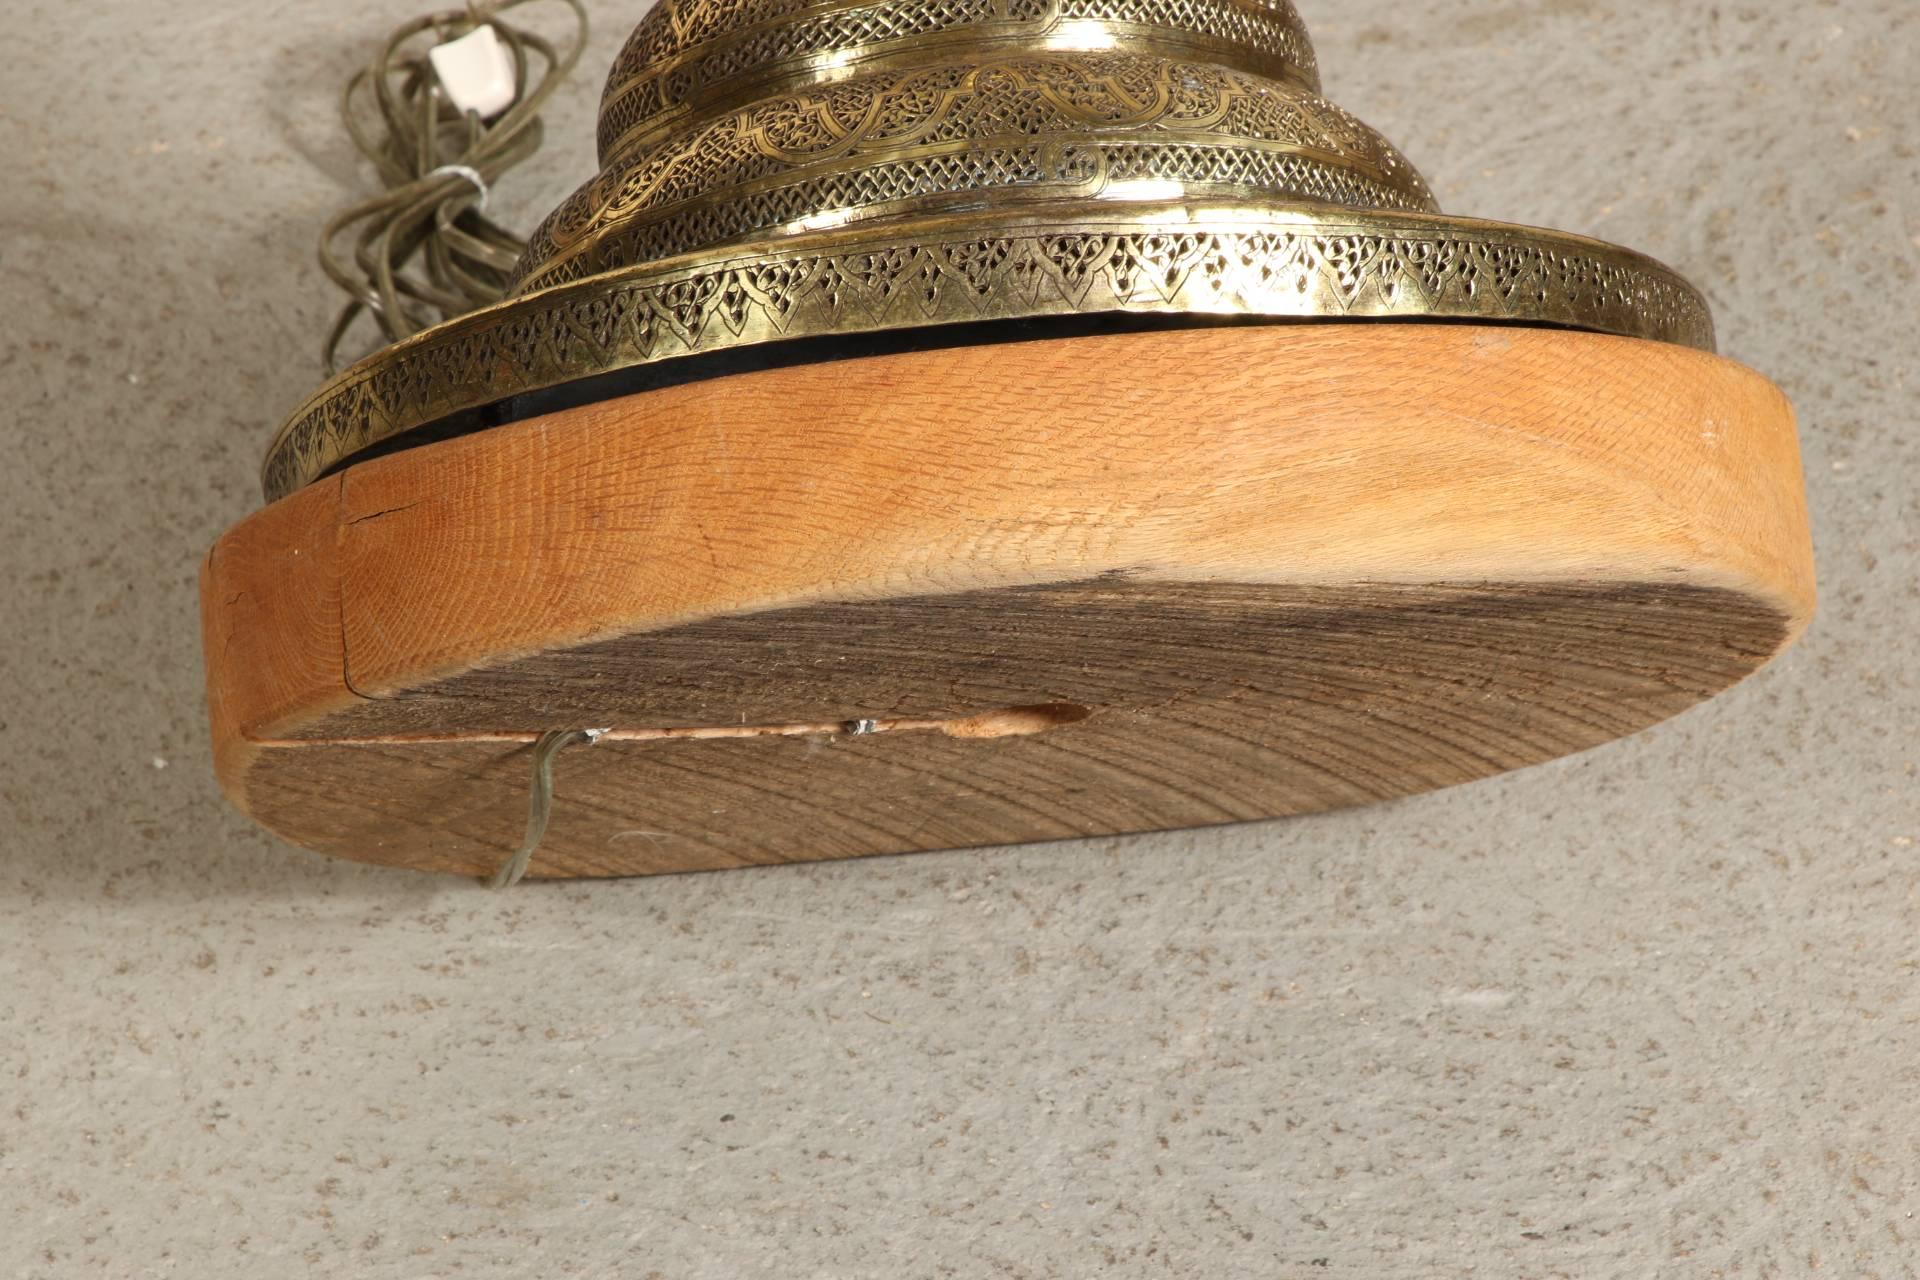 A pierced brass standard with flared top and tiered bulbous base. With brass top lamp fittings and mounted on a circular wood base.
Condition: some wear to the wood base.